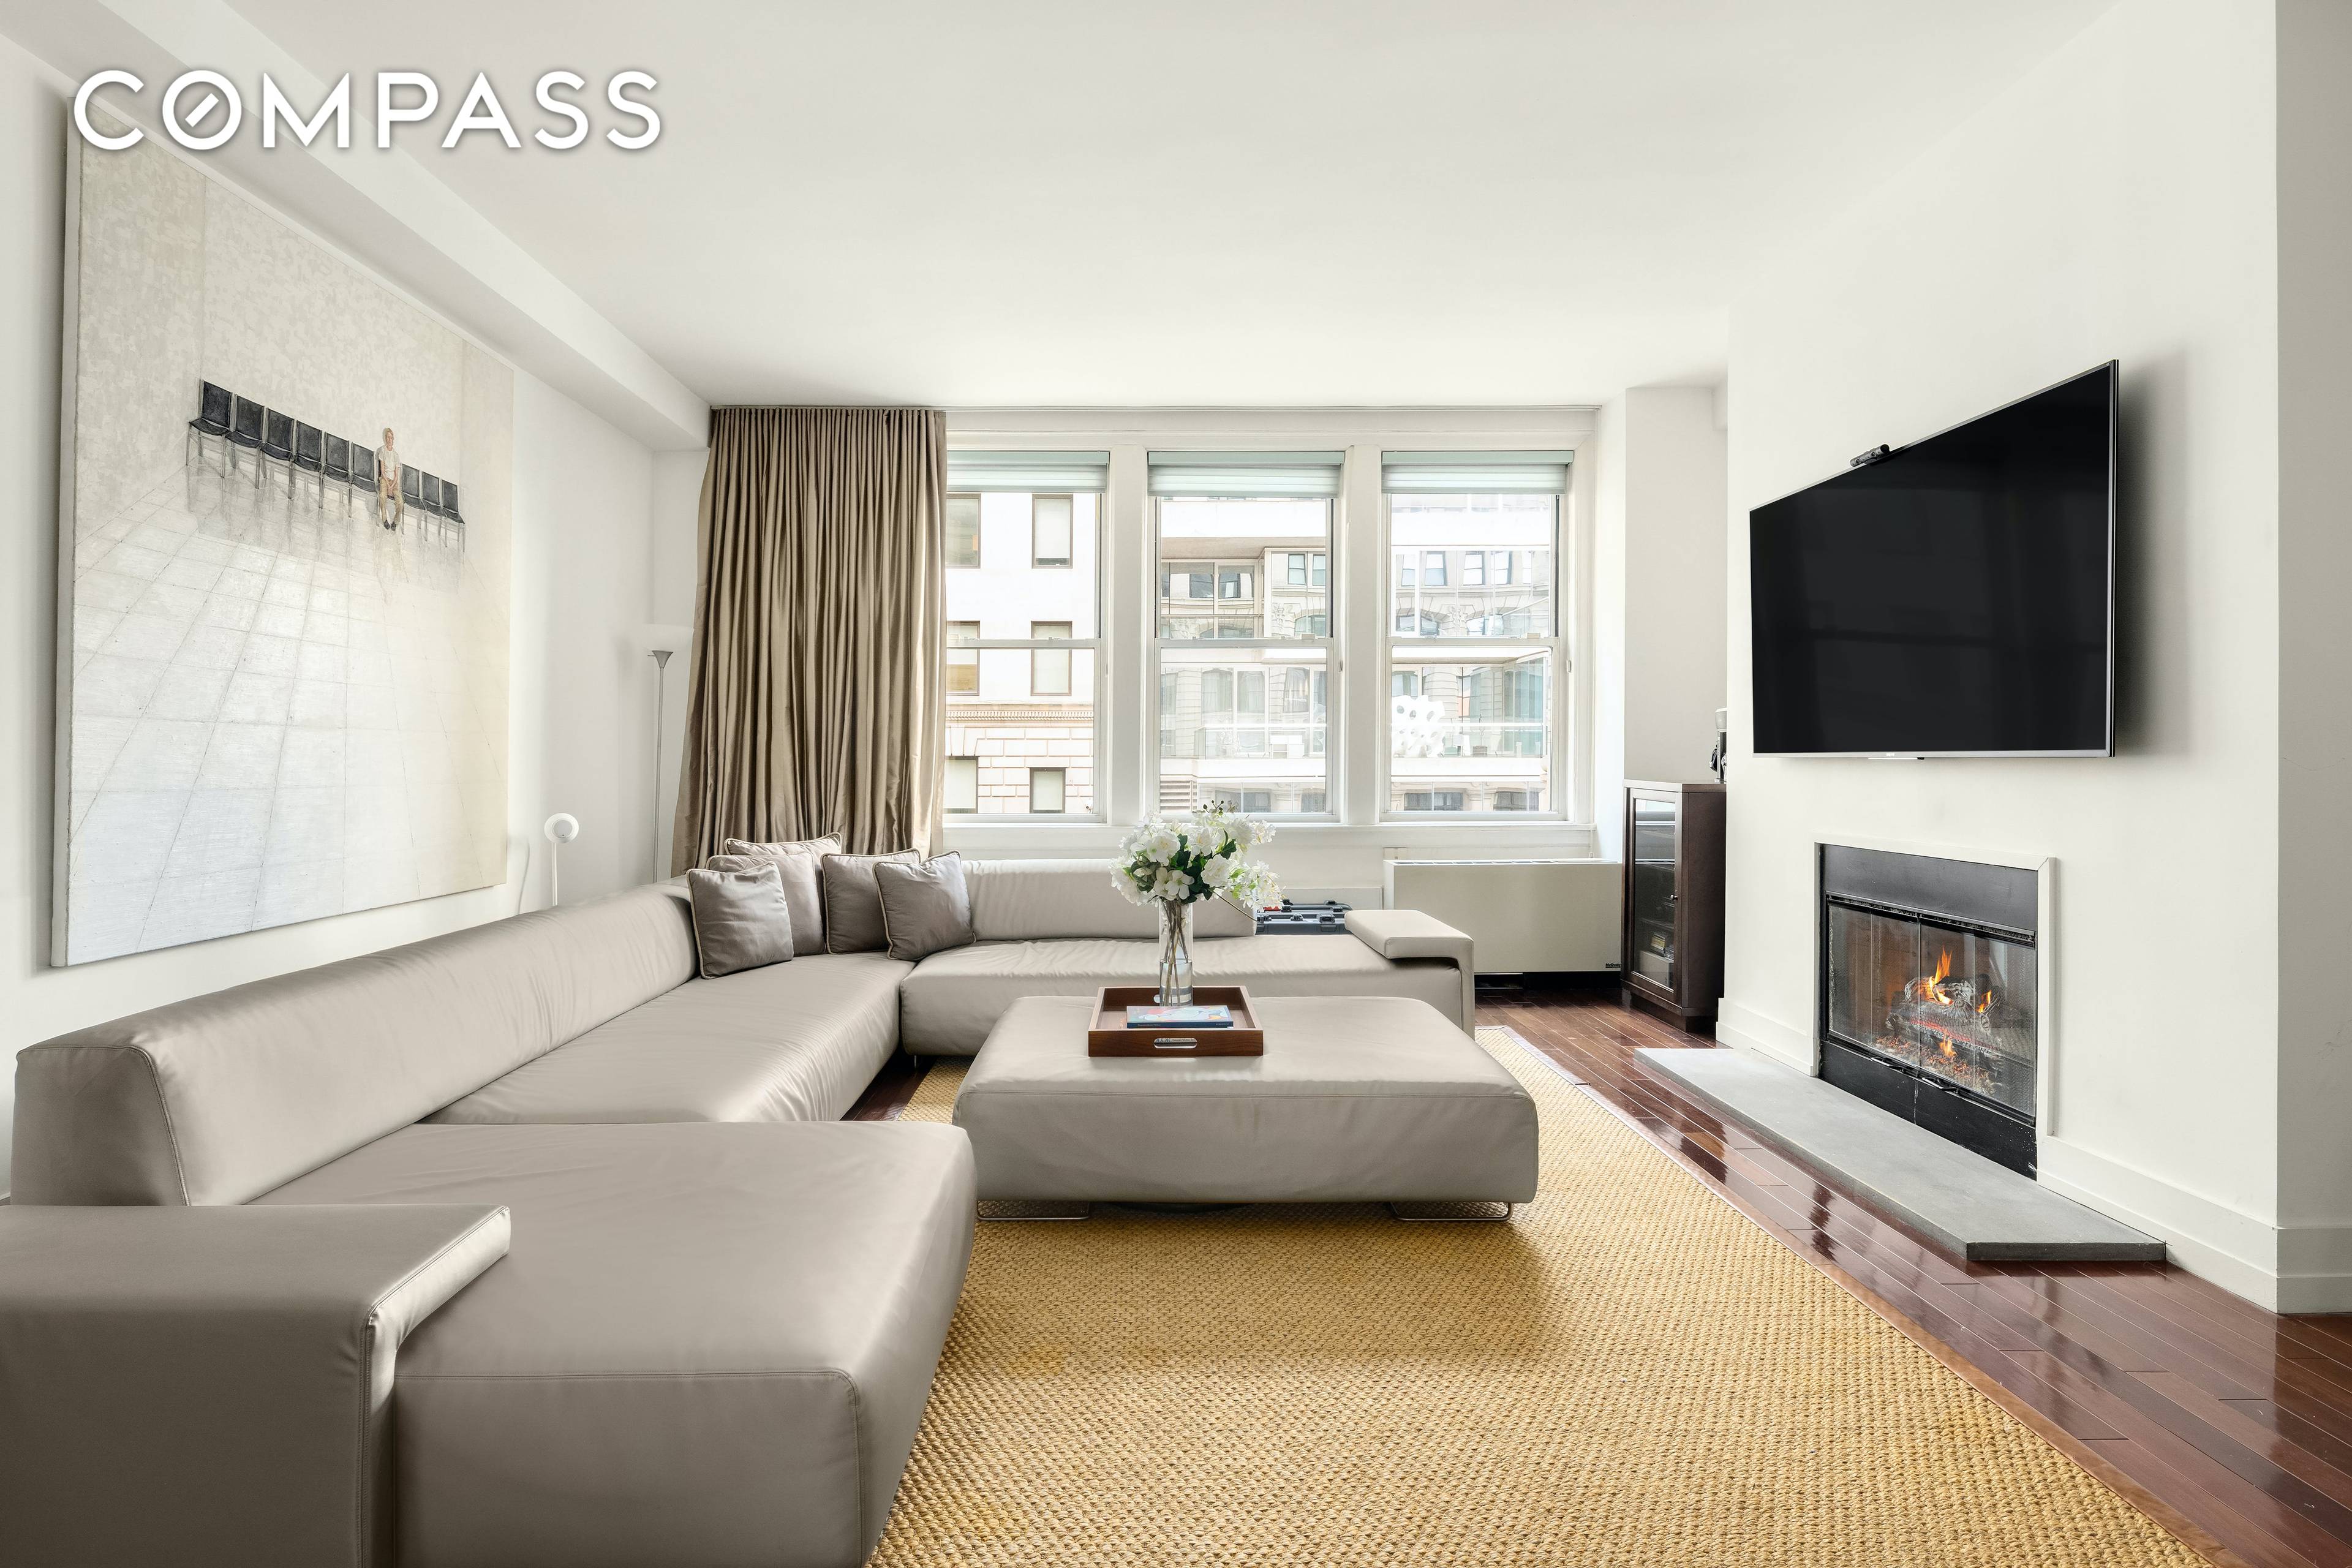 Residence 3E is a stunning 3 Bedroom 3 Bathroom jewel located in beautiful Tribeca.